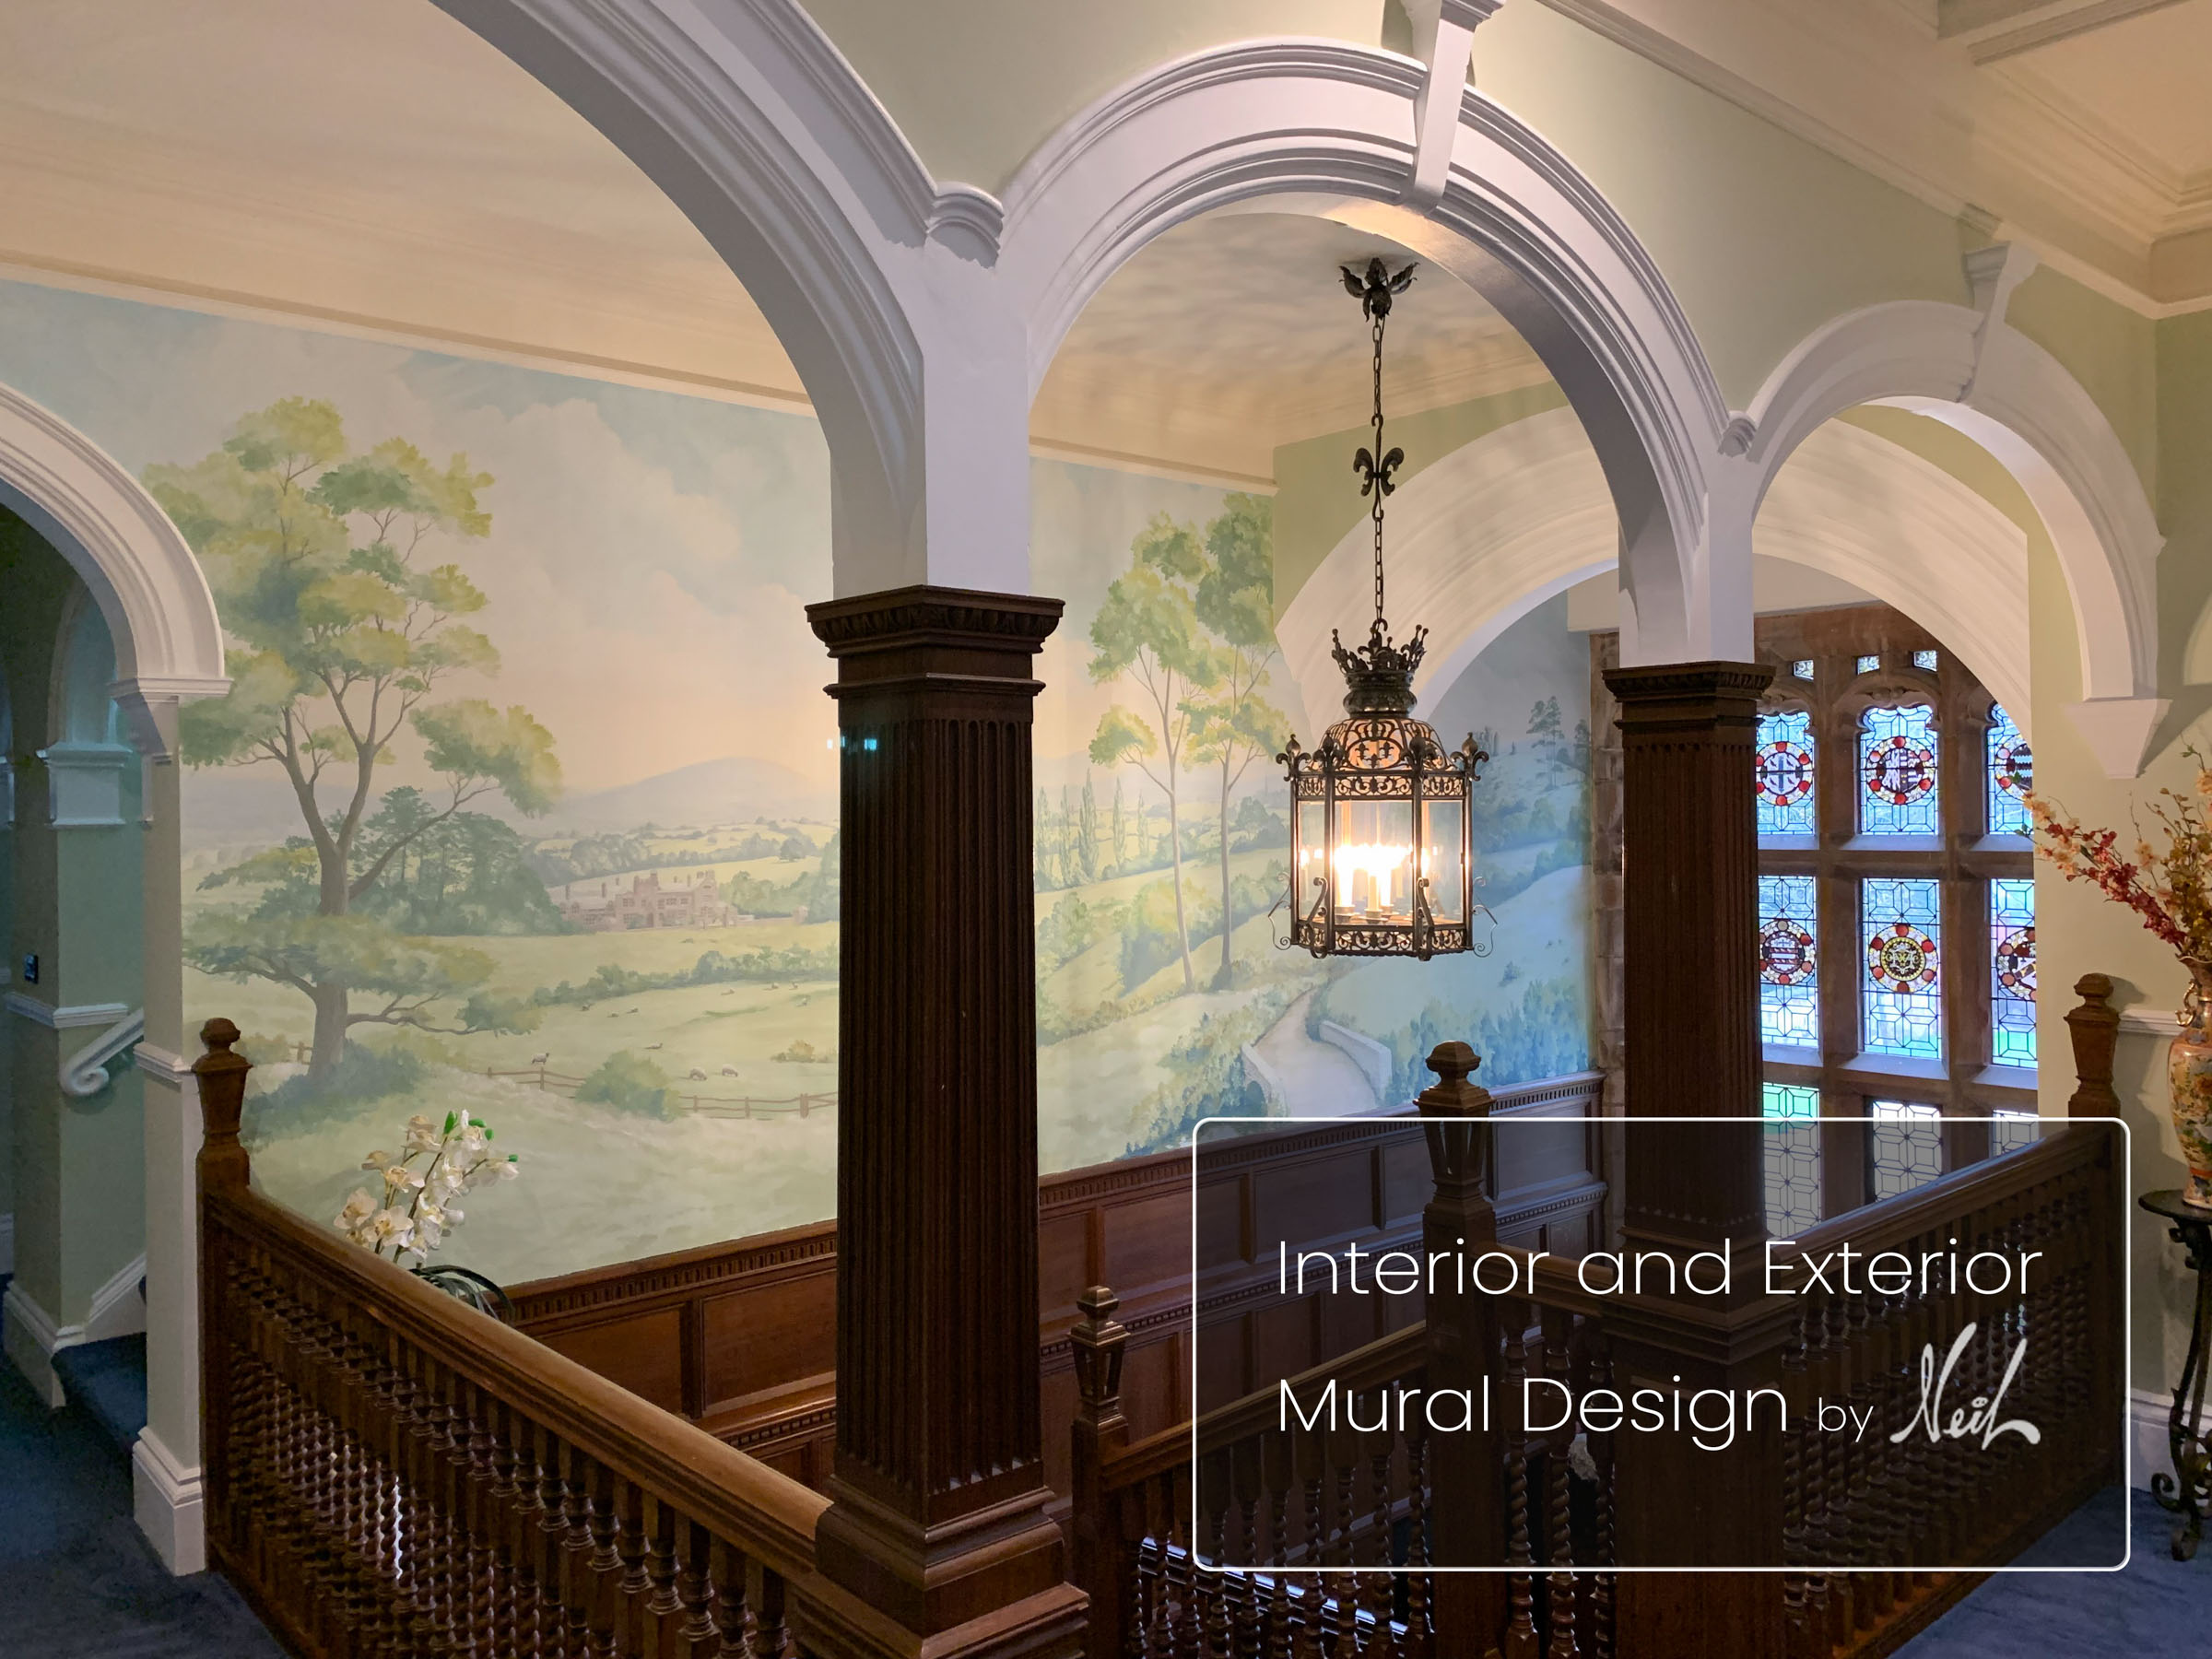 Home Interior and Exterior Mural design by Neil